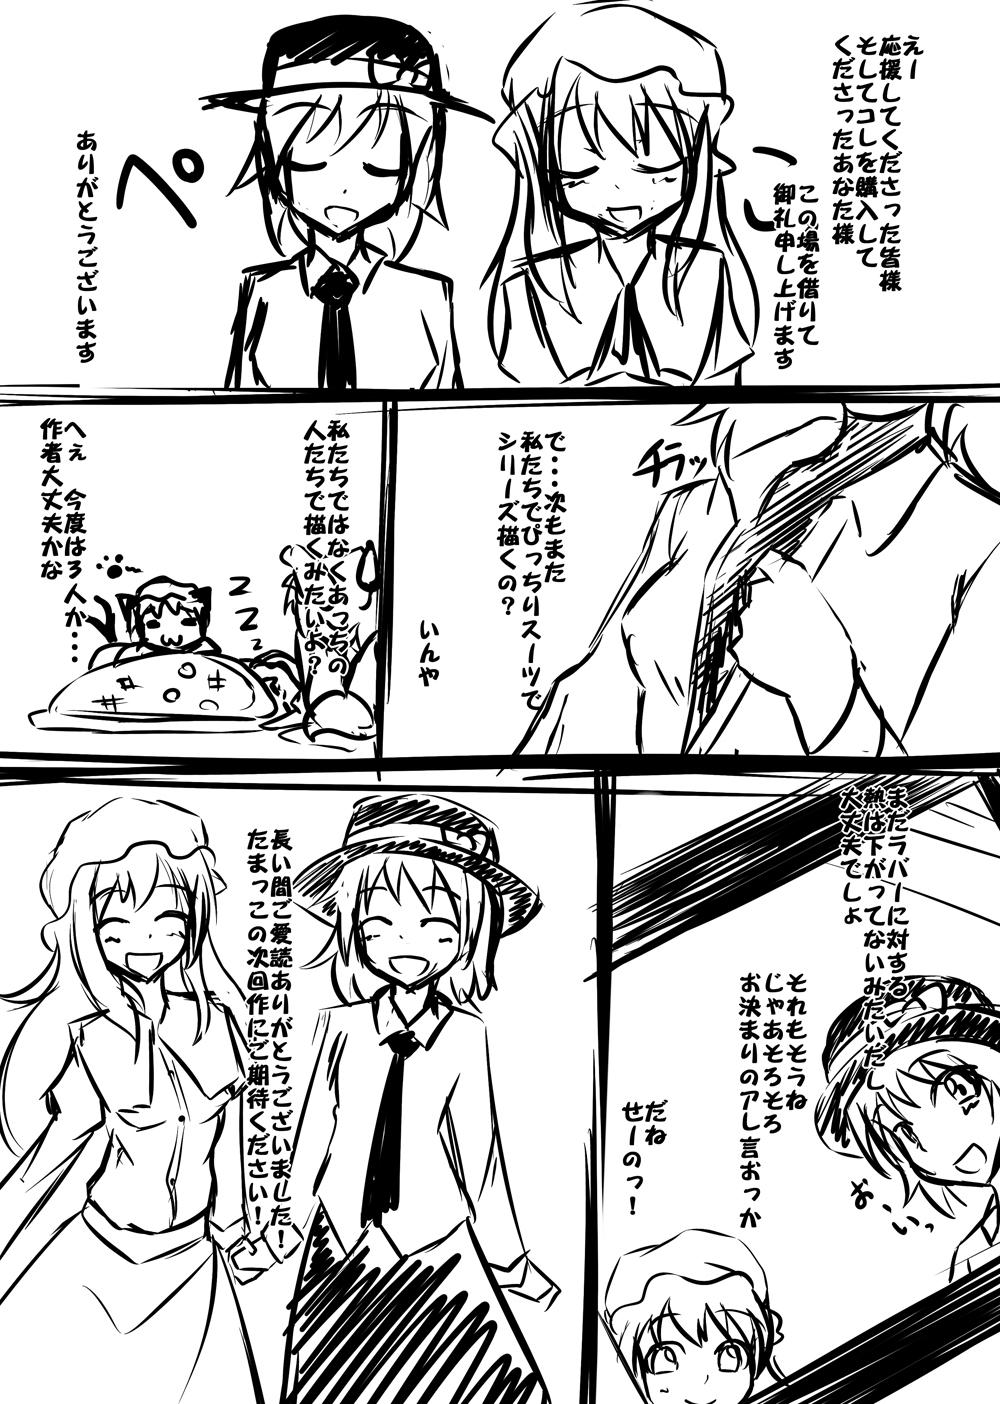 Jock 2nd Skin Soushuuhen - Touhou project Officesex - Page 154